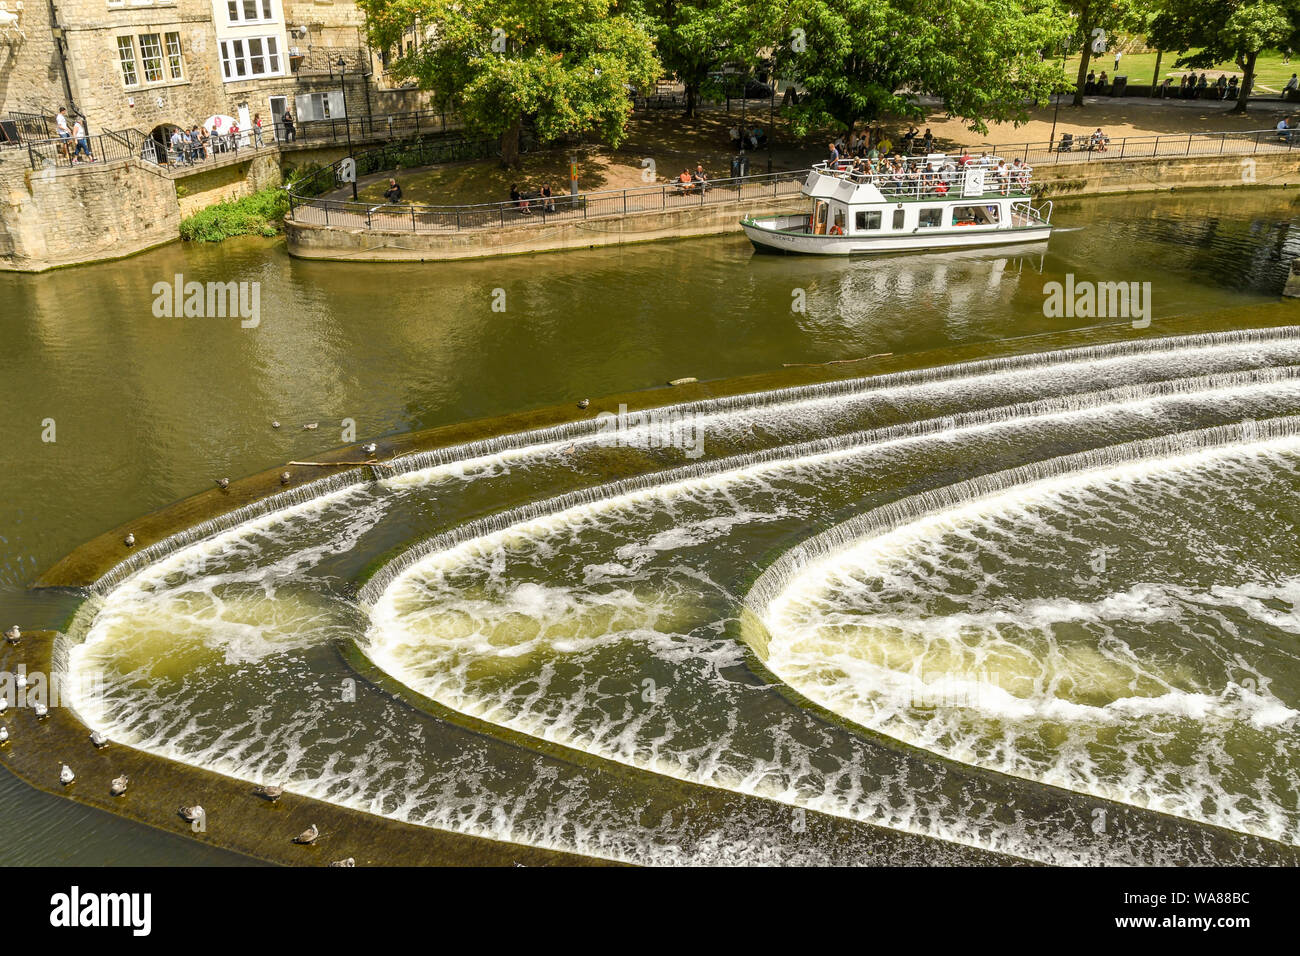 BATH, ENGLAND - JULY 2019: The horseshoe shaped Pulteney Weir on the River Avon in the centre of Bath. A tourist boat is in the background. Stock Photo